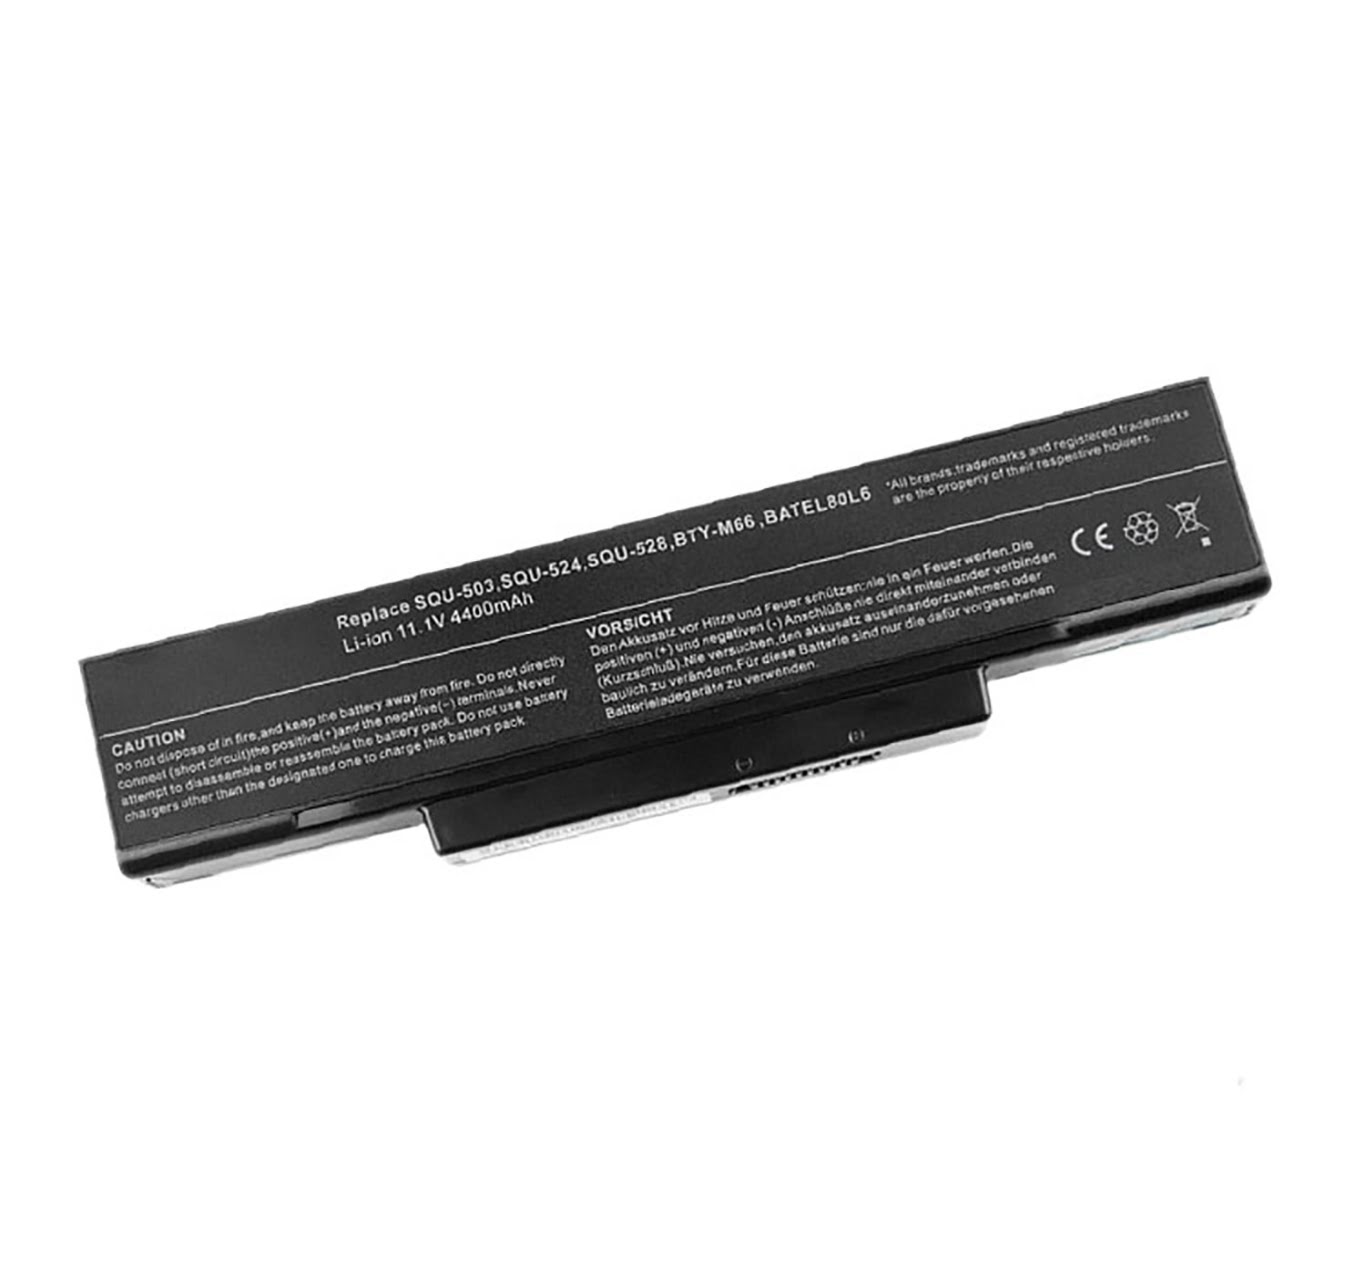 Asus 1034t-003, 1916c4230f Laptop Battery For Asmobile As62fm945gm1, Asmobile As62fp945gm1 replacement